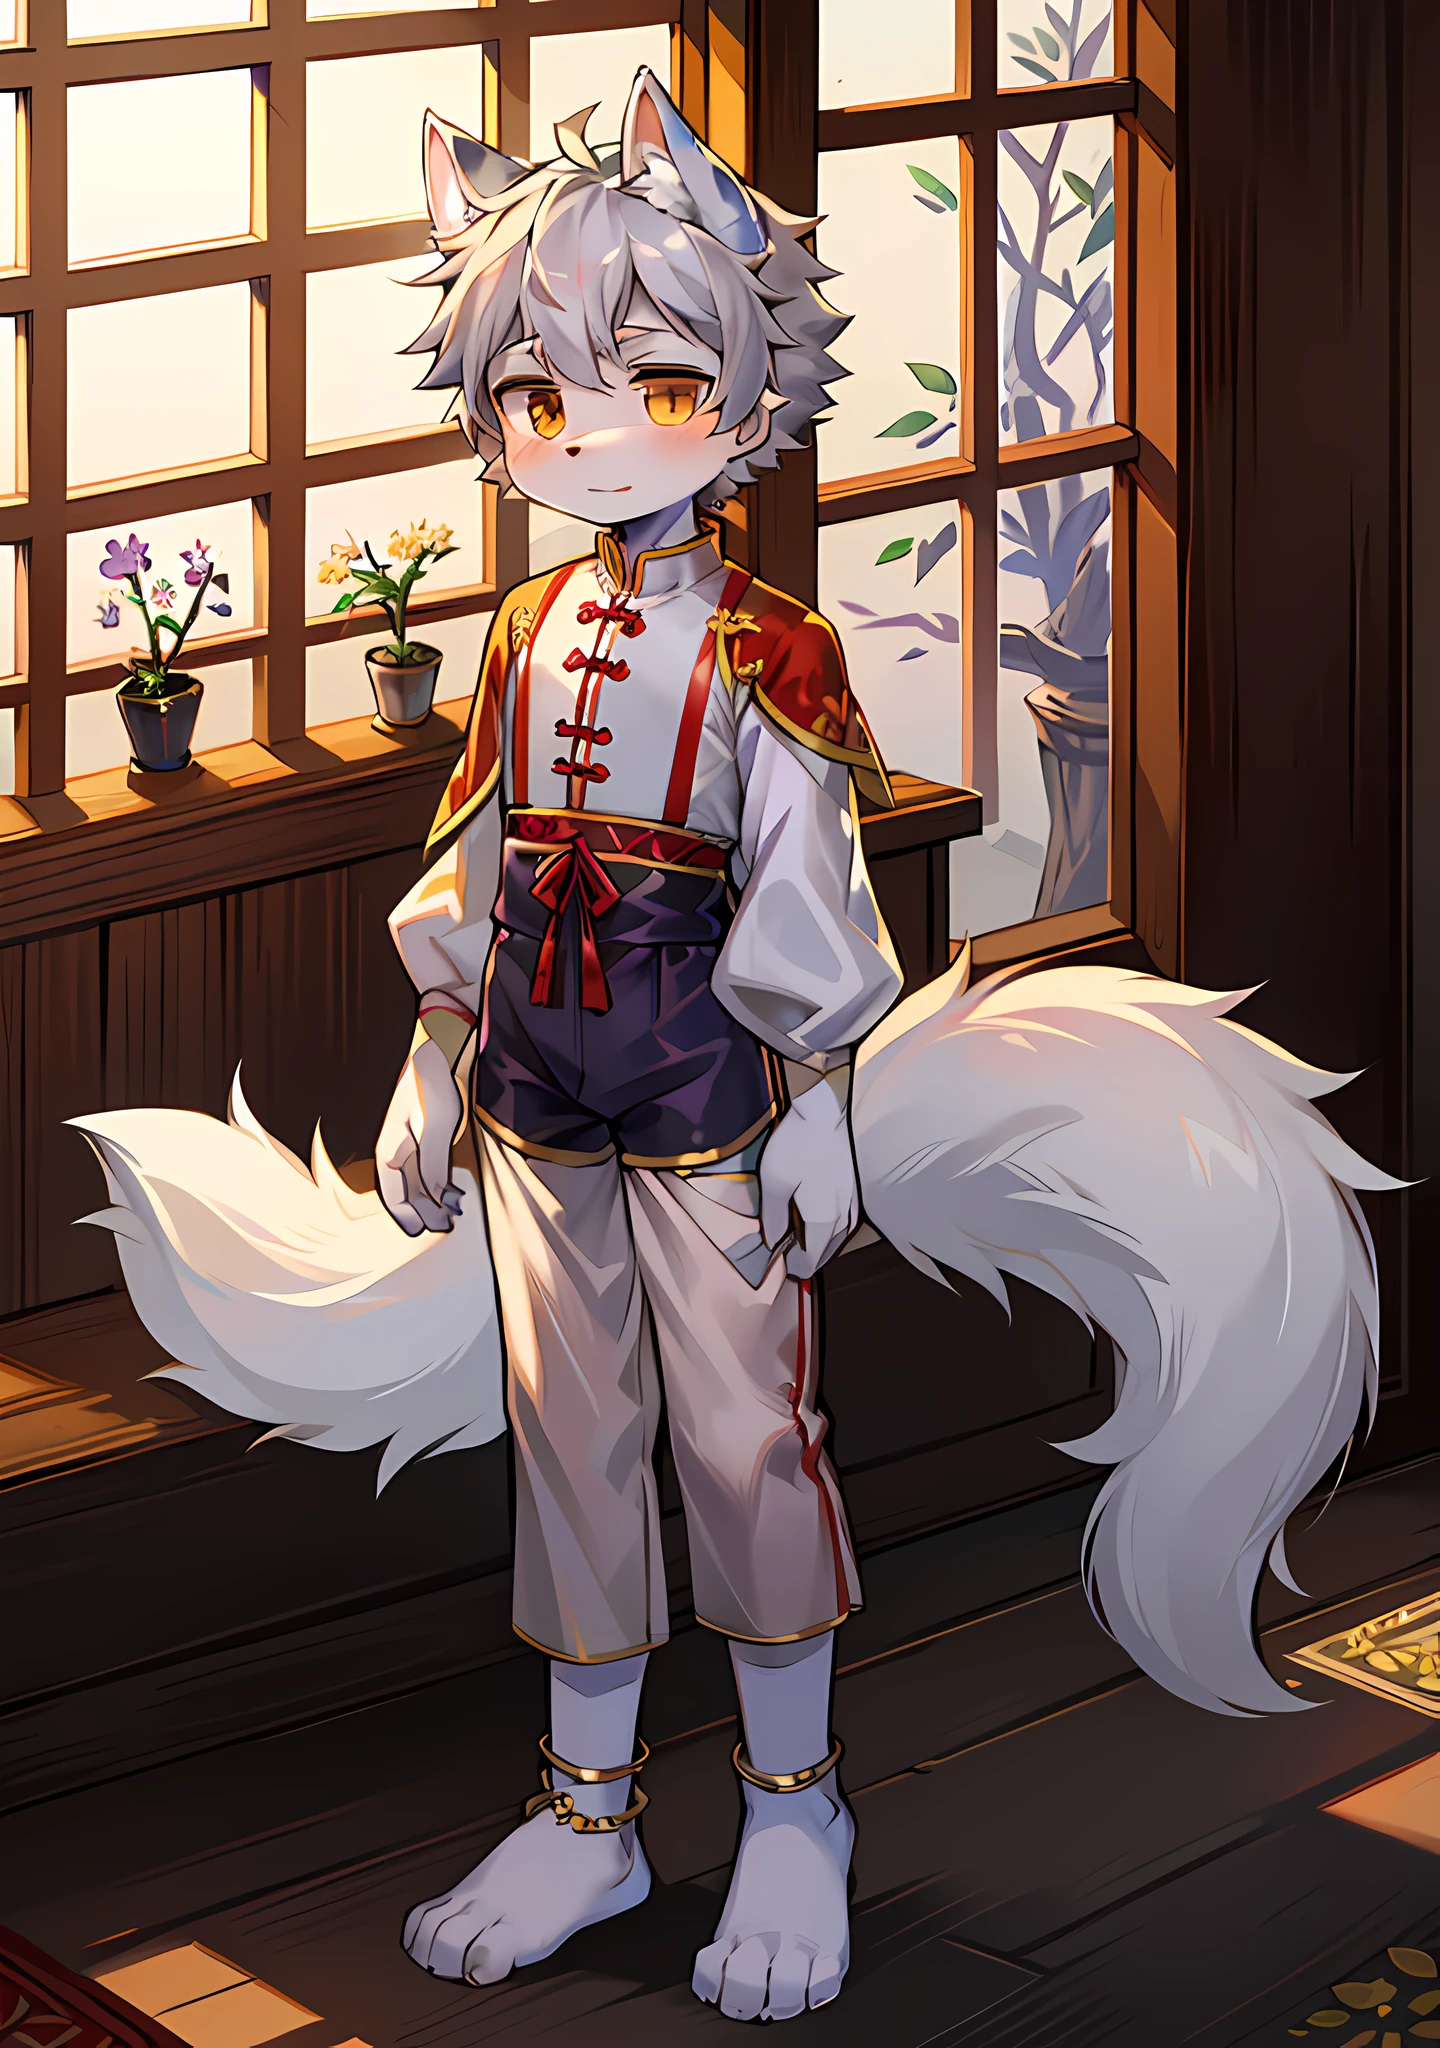 Double Wolf Brother Dog Brother furry , Dog Boy, Dog Boy, Dog Boy, Dog Boy, Small, (Dog Tail), Little Feet (with Socks), Flower Anklet, Yellow Hair, Light Golden Eyes, , , Chinese Style Clothes (Red), AOEU, LONG CHEONGSAM (OUTER GARMENT), HANFU (OUTER GARMENT), WHITE CLOTHES (INNER SHIRT), BOY, BOY , BOY , BOY, NOBLE CLOTHES (RED), CUTE, Shota, on the way. furry , wolf boy, wolf boy, wolf boy, wolf boy, little man, (long wolf tail), little feet (with socks), floral anklet, gray hair, black eyes, , national style clothes (purple), aoeu, aoeu, long cheongsam (outer garment), hanfu (outer garment), white clothes (inner shirt), boy, boy , boy , boy, noble clothes (purple), cute, zhengtai, on the way